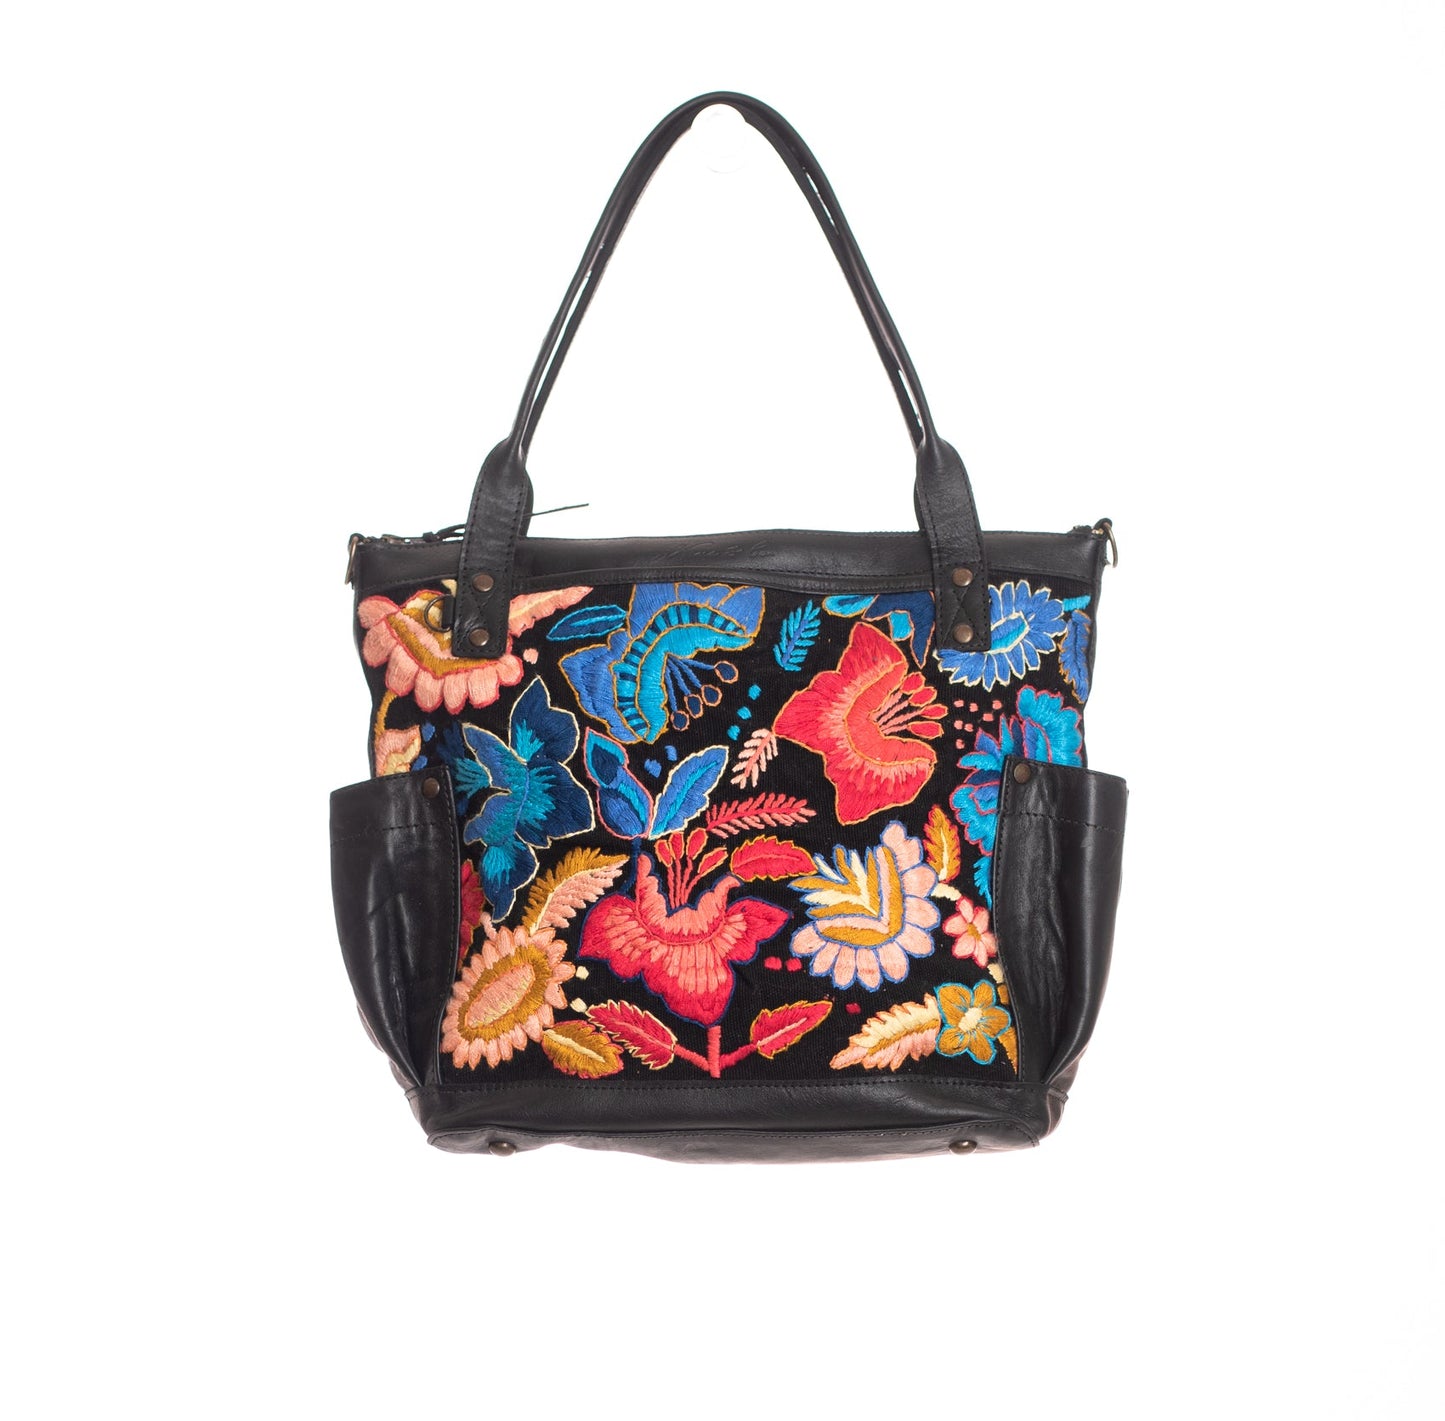 THE MEDIUM PERFECT BAG 2.0 - EMBROIDERED BLOOMS - BLACK - NO. 12618